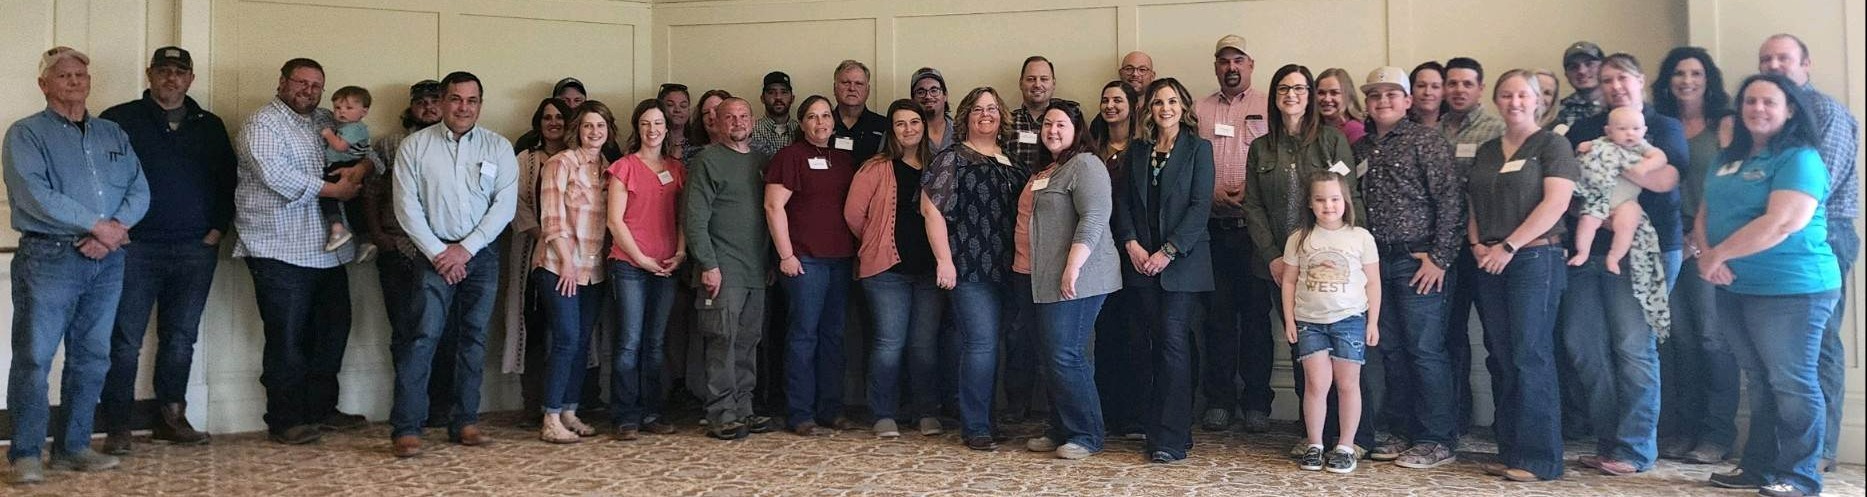 NORTHEAST BEEF PRODUCERS INSPIRED BY SOUTH DAKOTA RANCHER DURING RECENT WORKSHOP